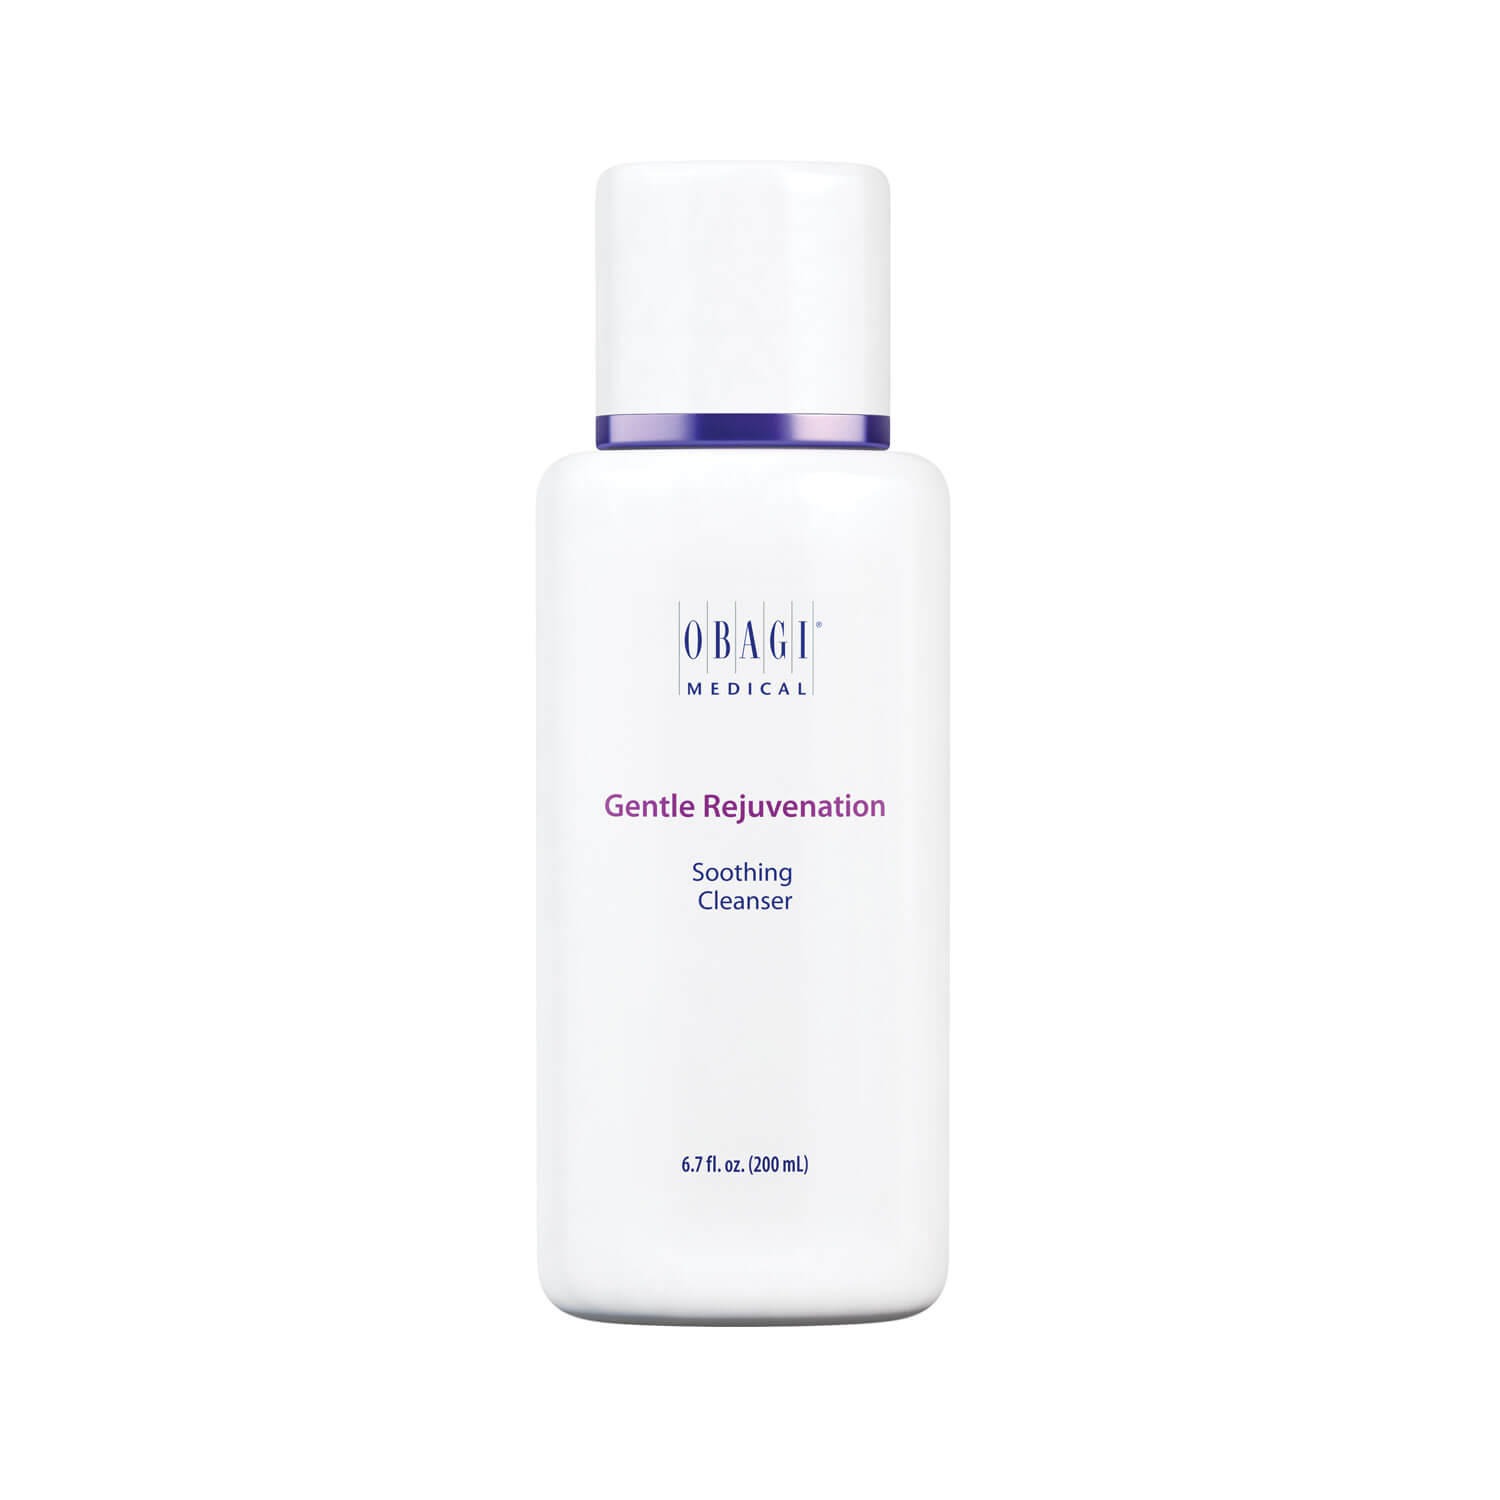 Soothing cleanser. Obagi gentle Cleanser. Obagi gentle Cleanser с упаковкой. Gentle Cleanser Zein Obagi. Обаджи косметика gentle Cleanser all Skin Types.